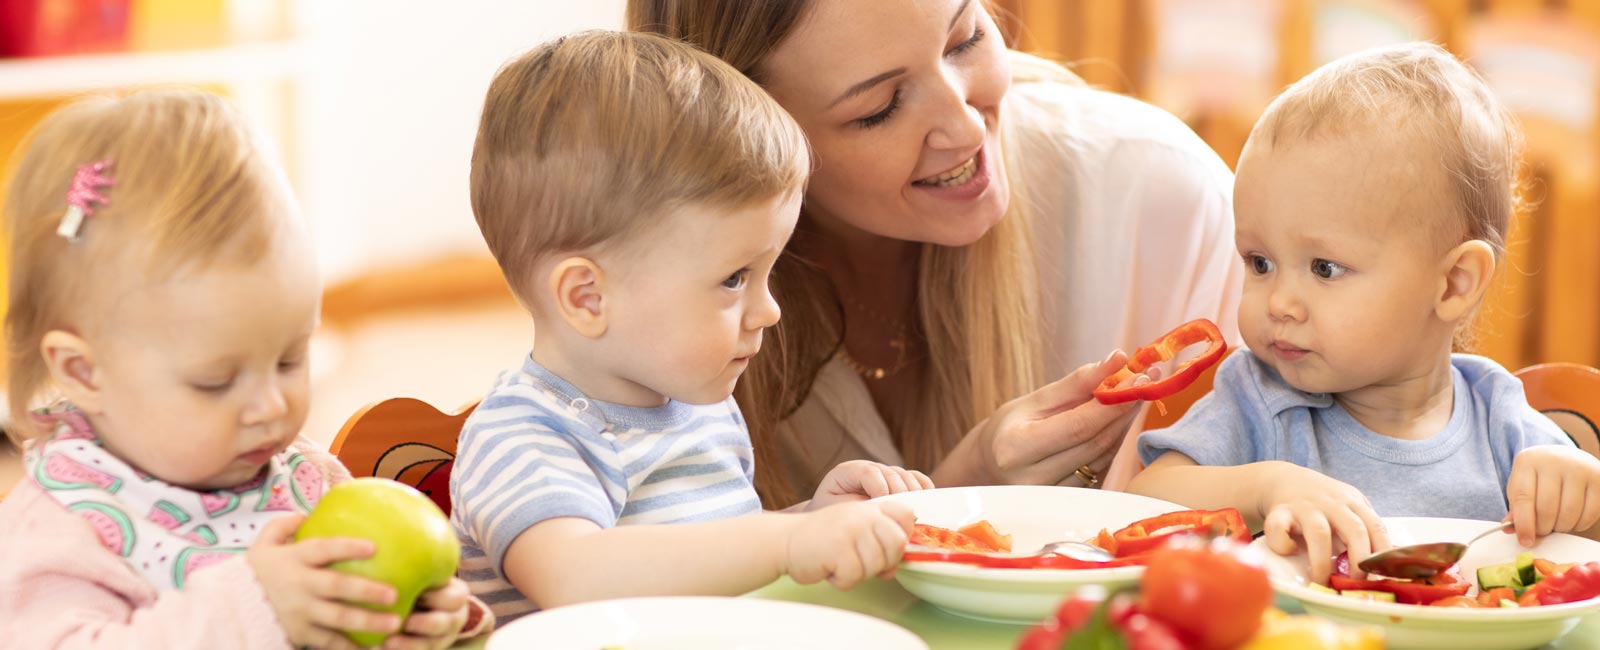 Our in-house chef uses only high quality, fresh ingredients for children's meals.